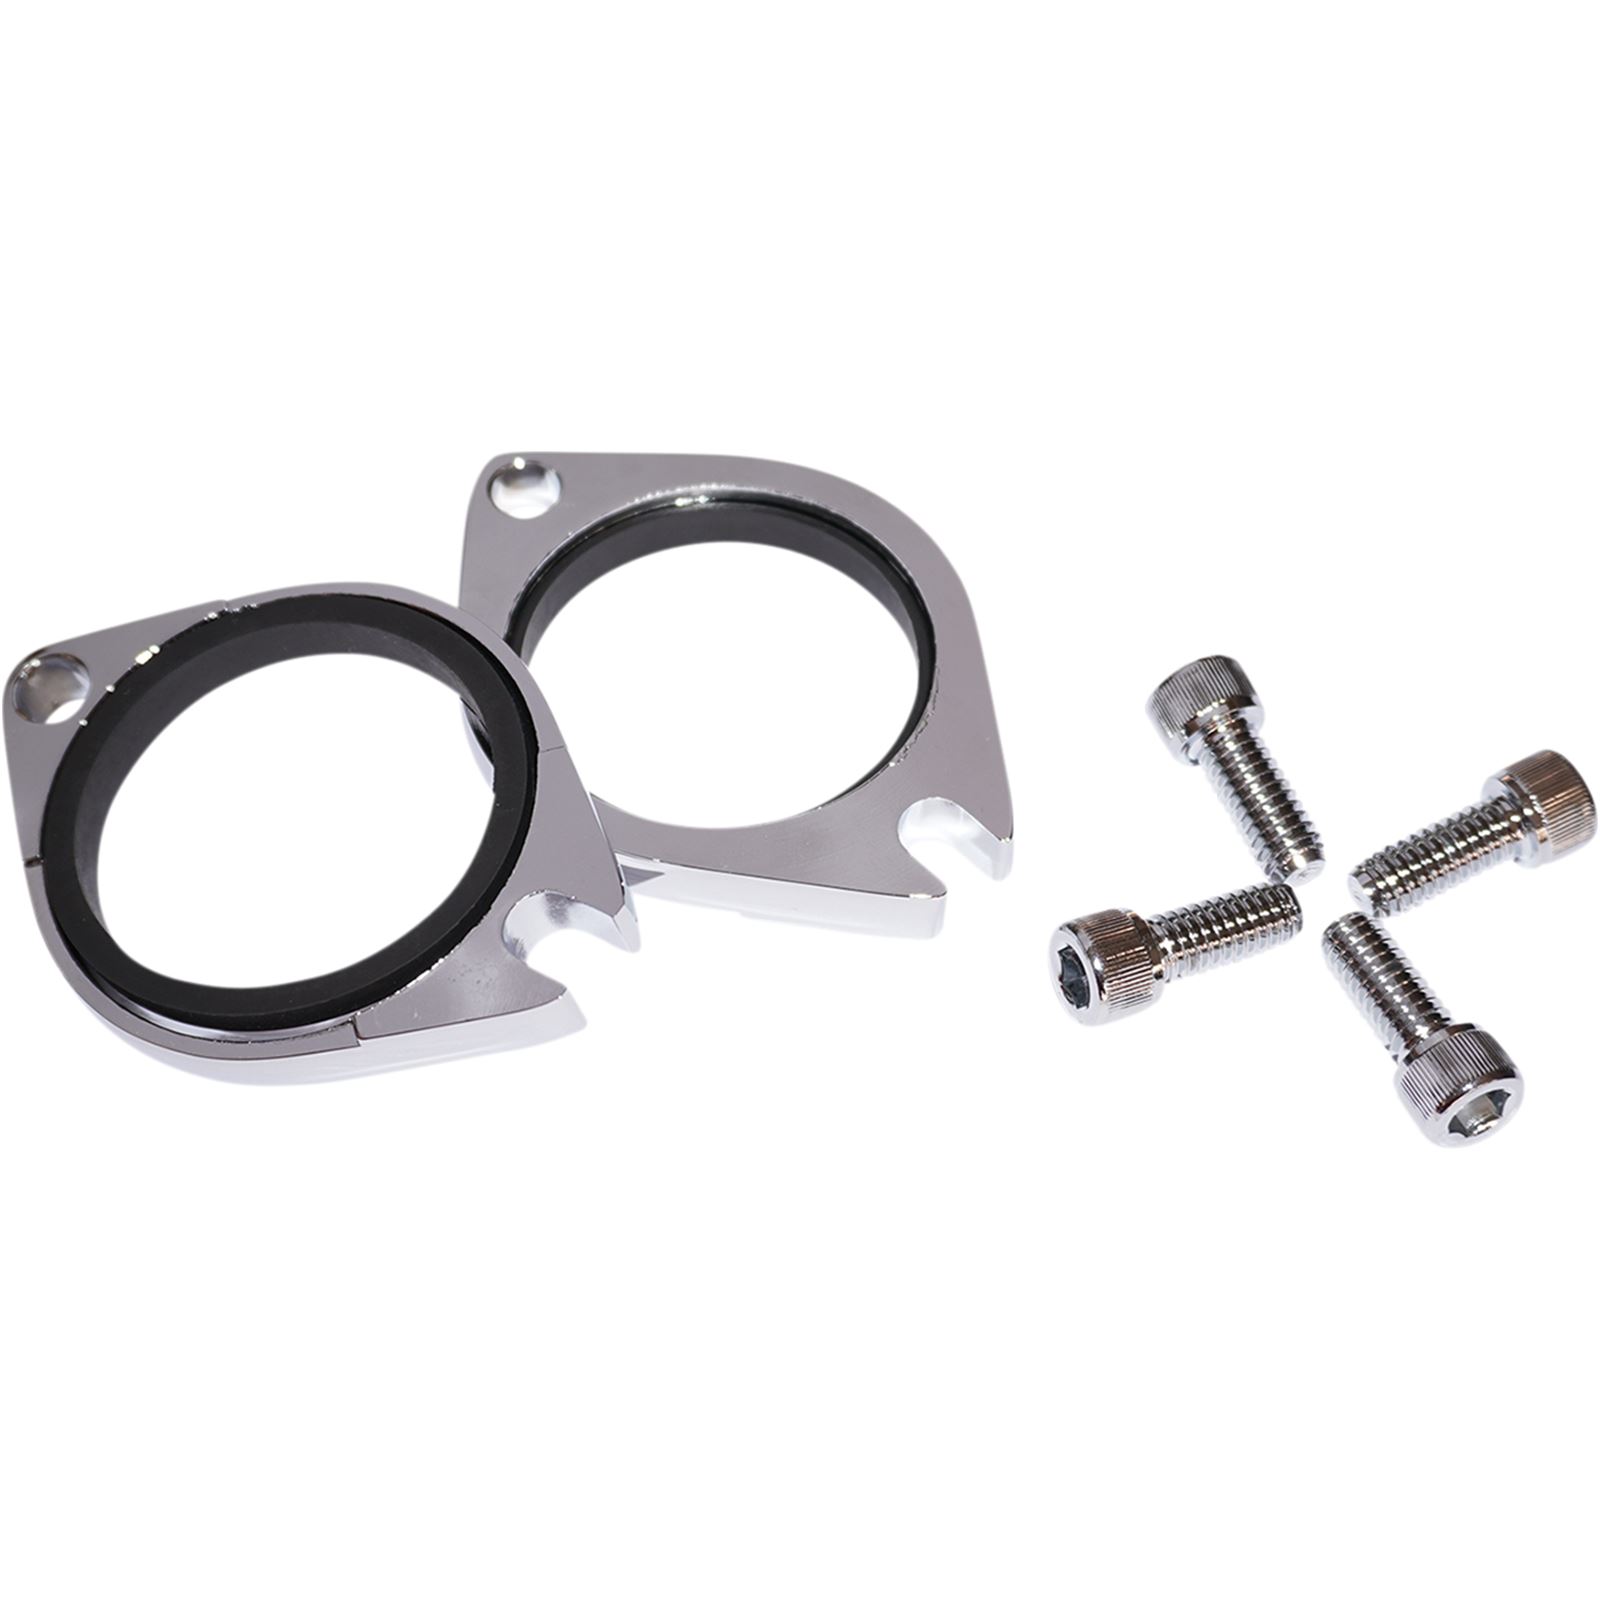 Drag Specialties Intake Flange with Chrome Seals - Pair